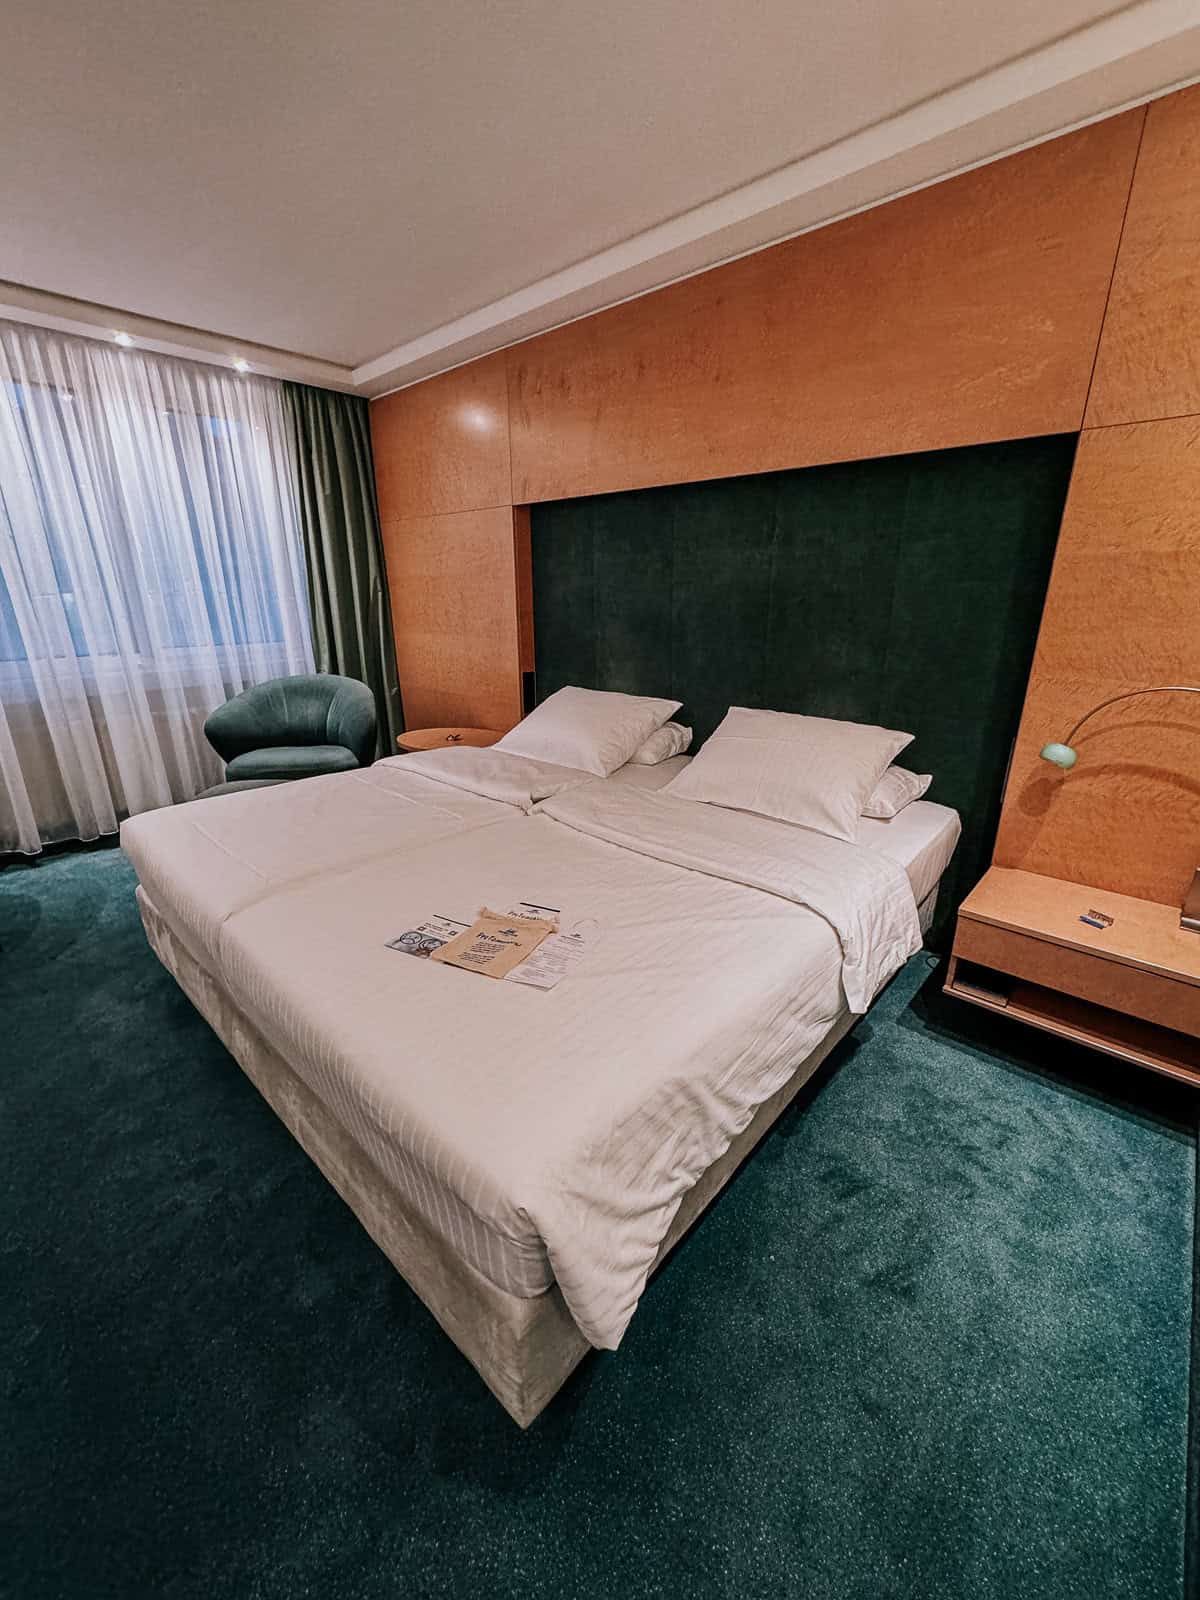 A spacious hotel room featuring a large bed with white linens, a green armchair, and a green carpet. The room has a modern yet warm ambiance, with a wide window draped with sheer curtains.